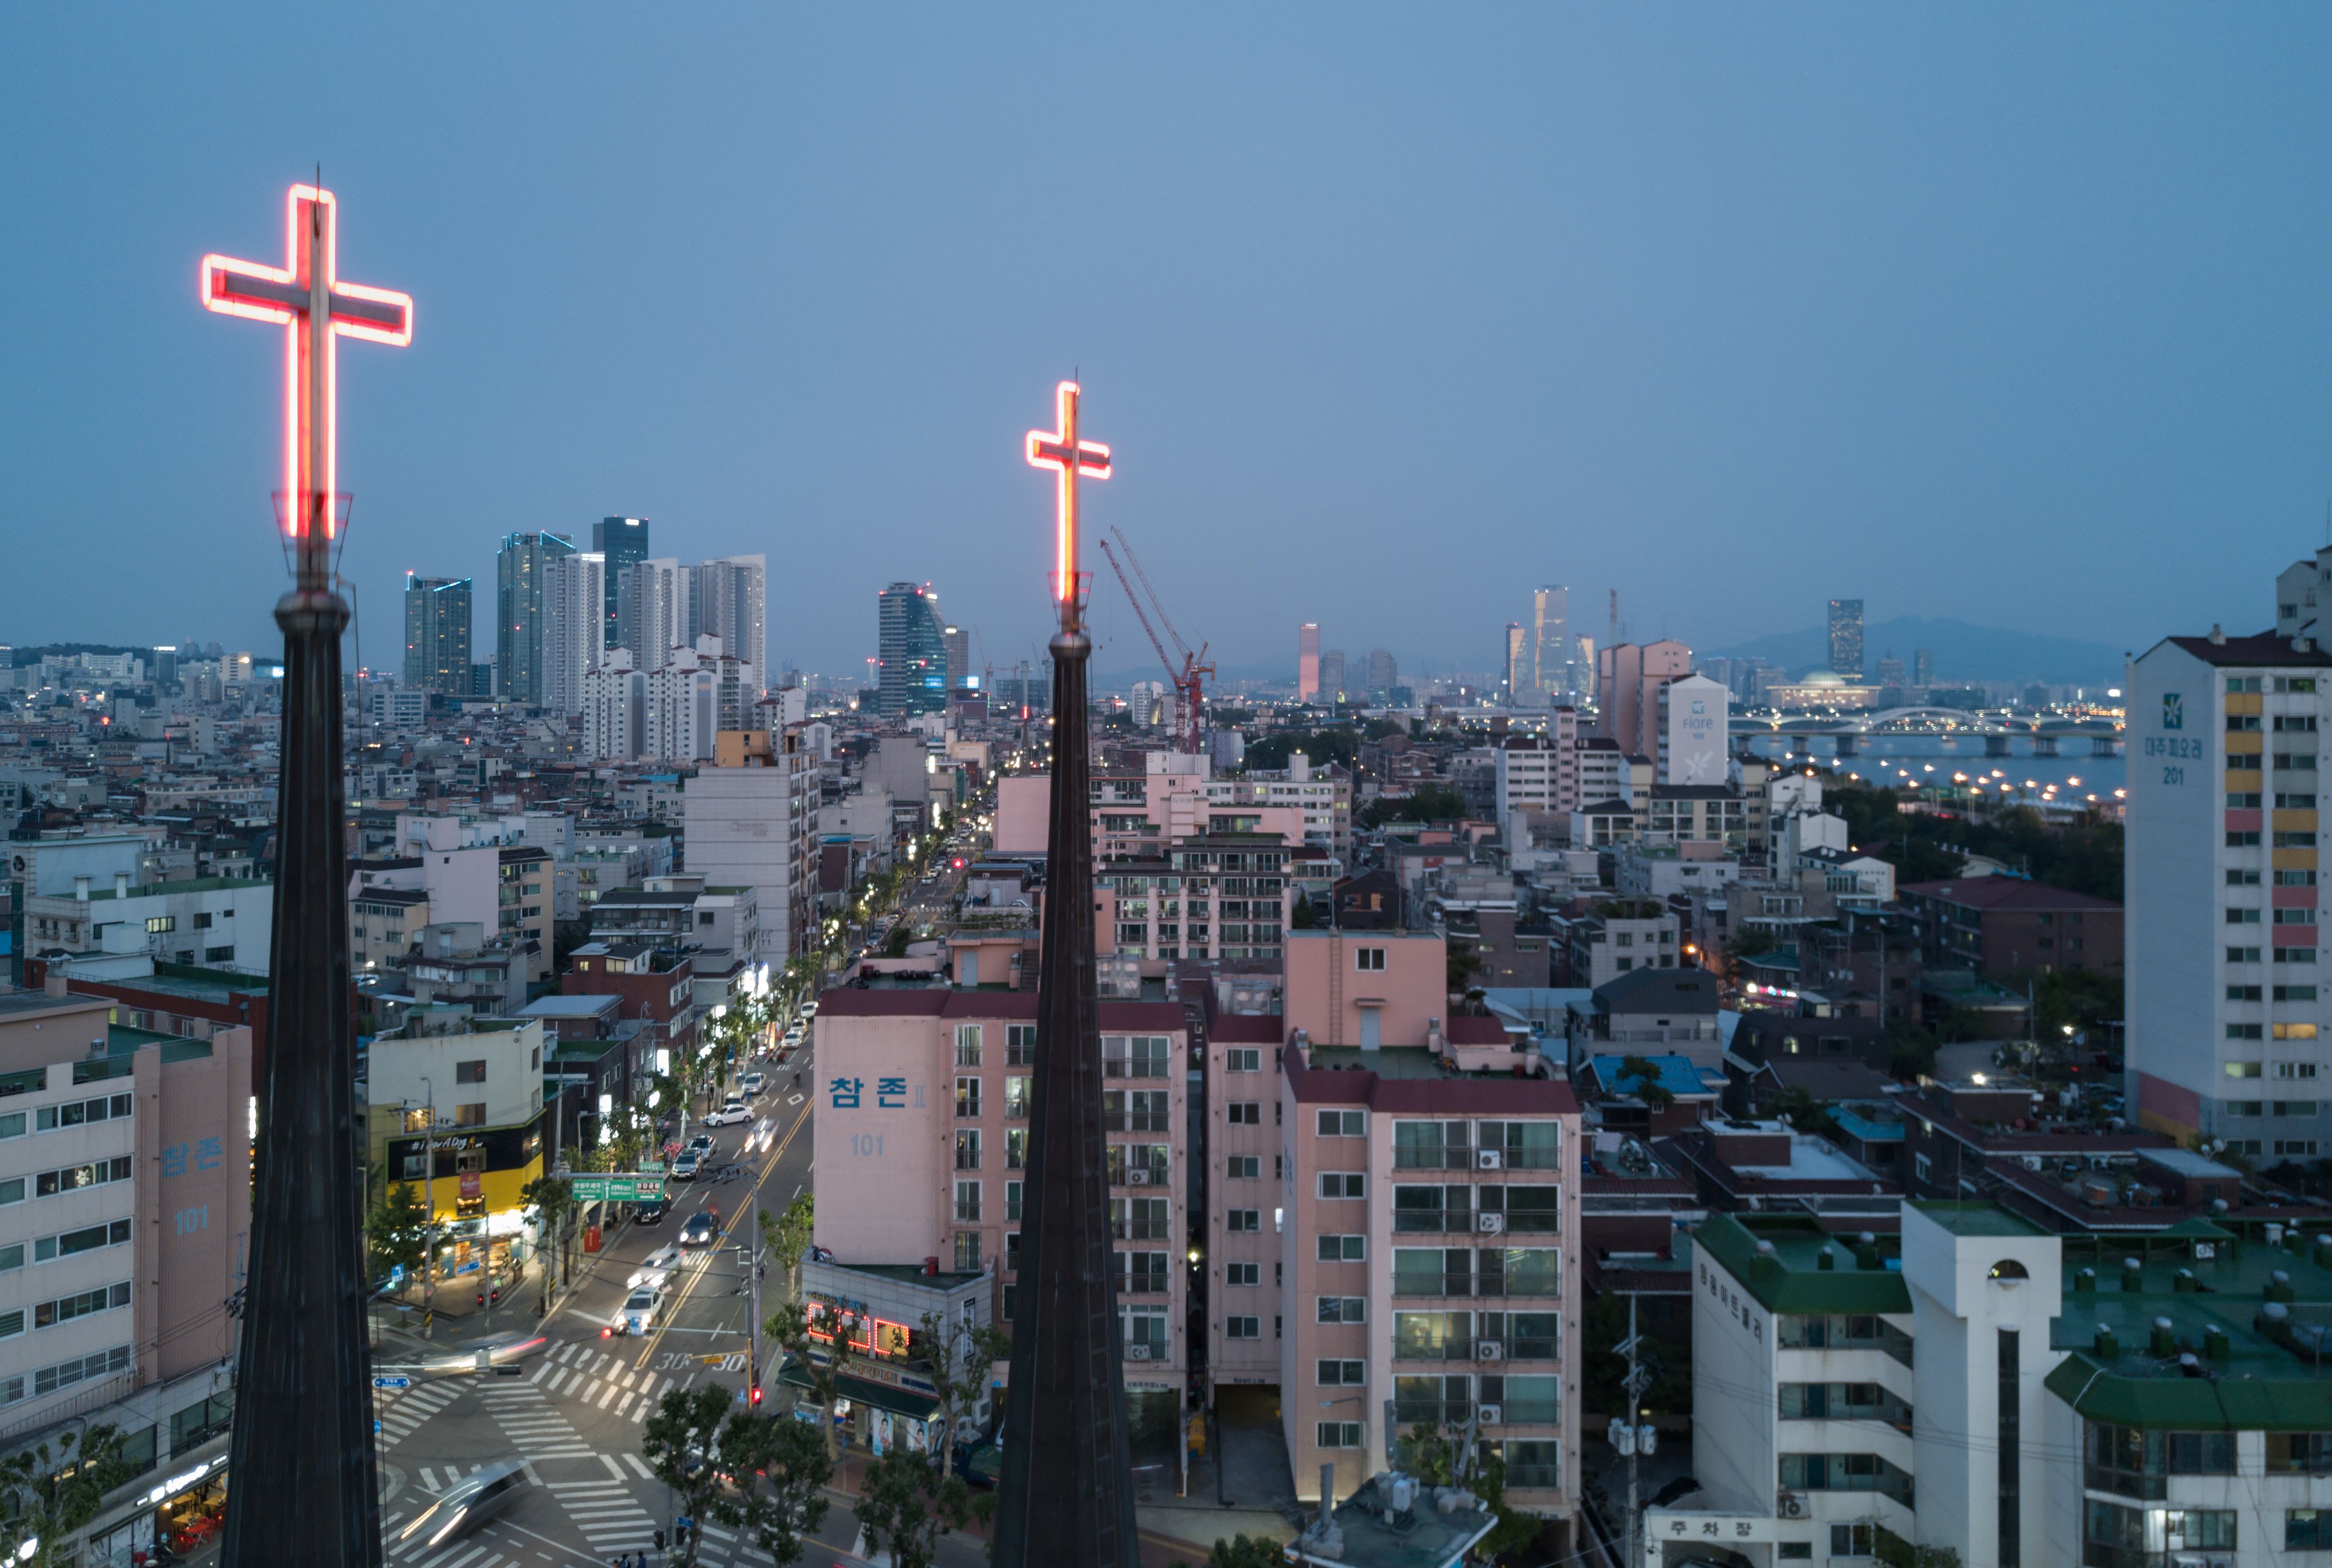 Illuminated crosses are displayed above a church, before the city skyline of Seoul, on May 18, 2017. (Ed Jones—AFP/Getty Images)